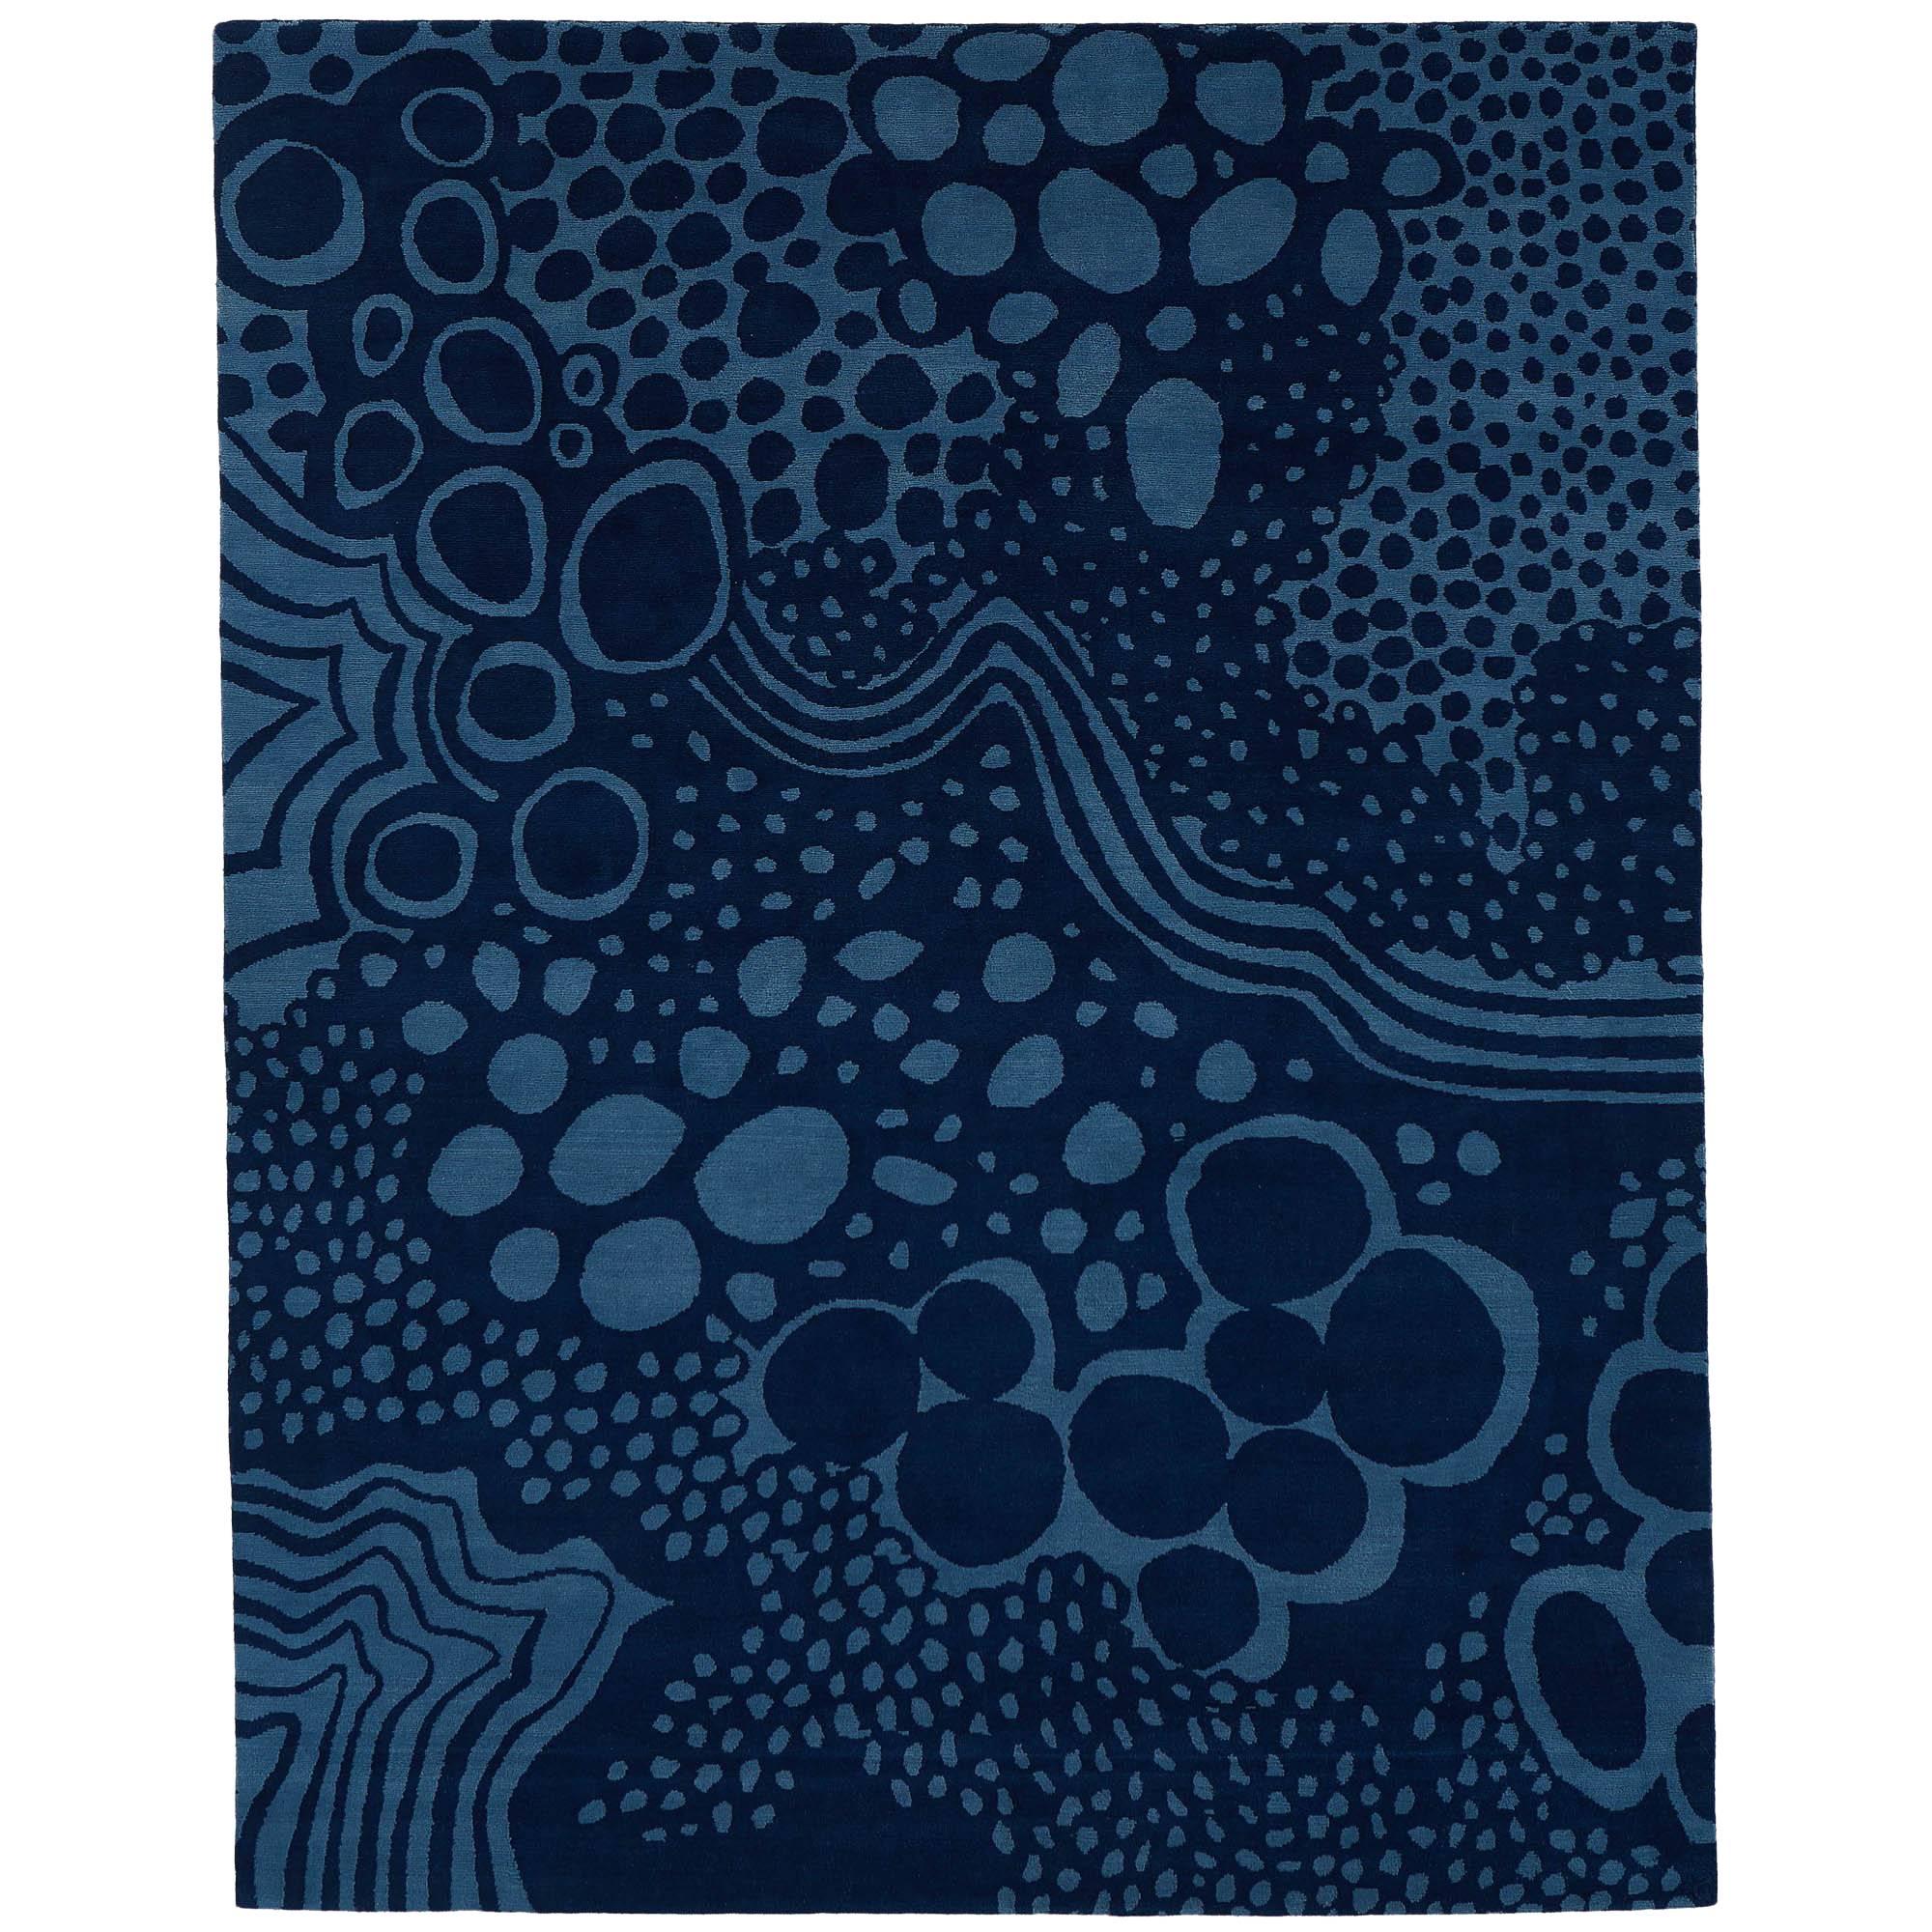 Angela Adams Glacier, Blue Area Rug, 100% New Zealand Wool, Hand-Knotted, Modern For Sale